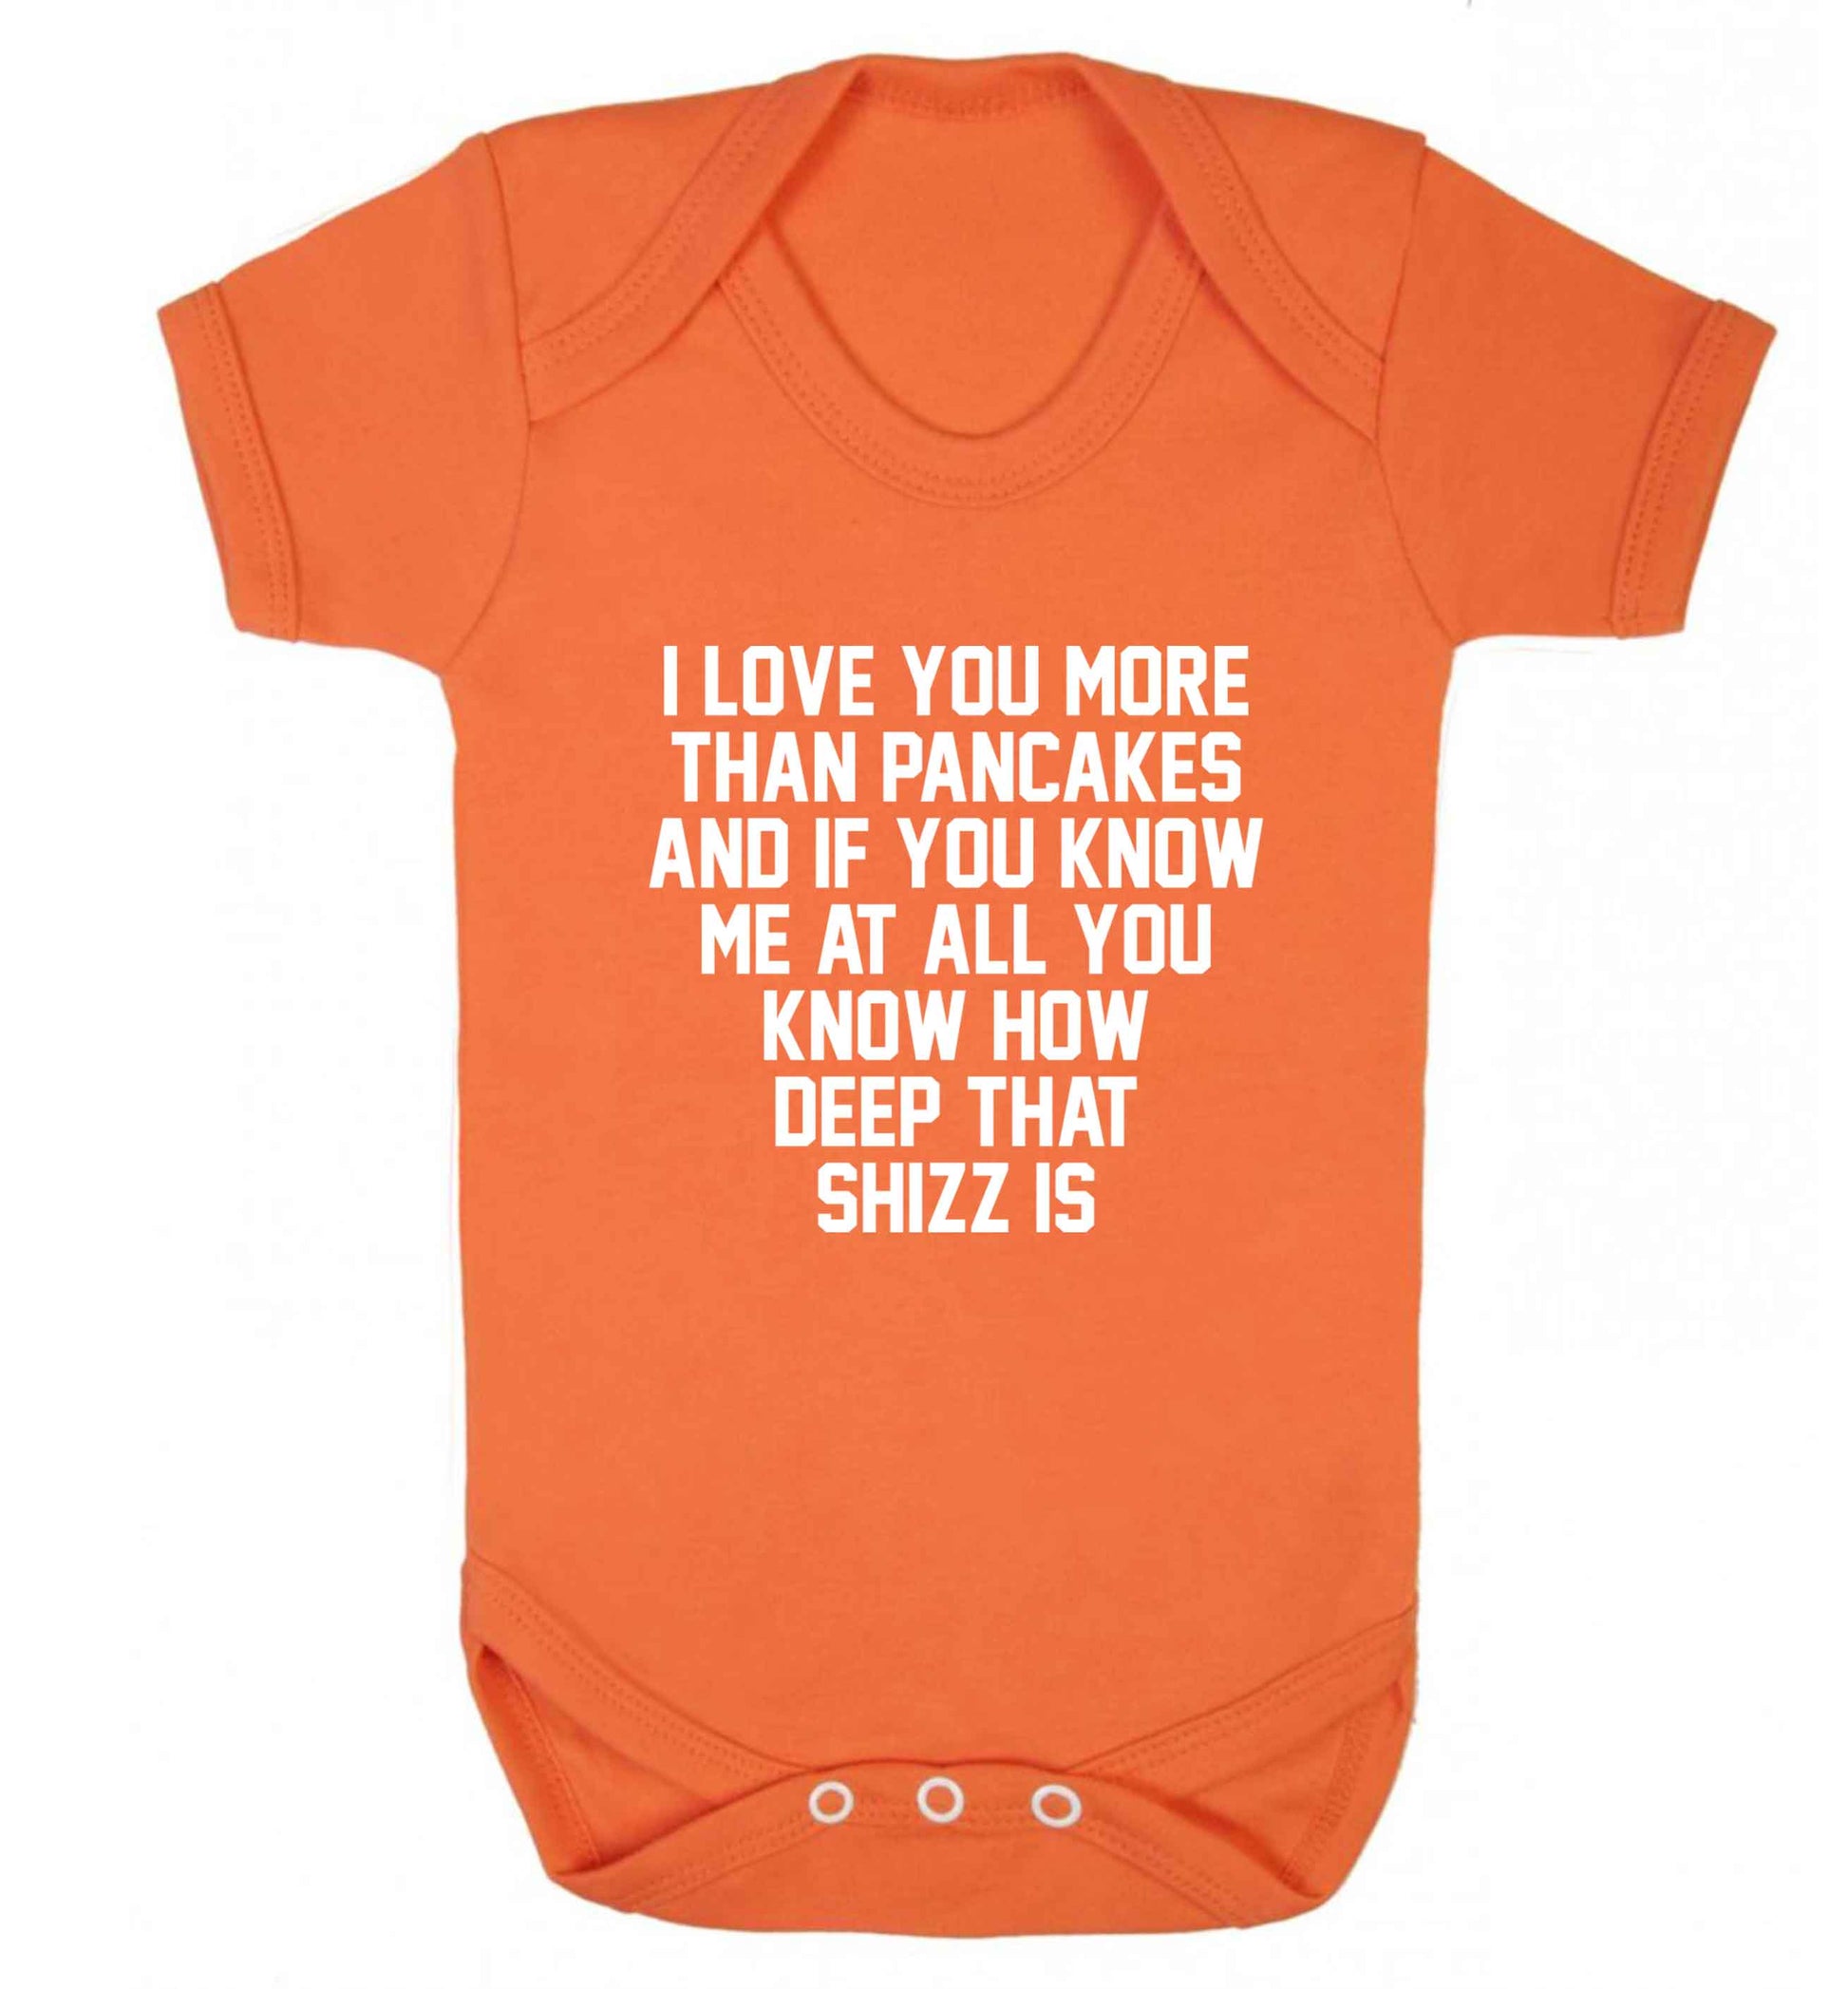 I love you more than pancakes and if you know me at all you know how deep that shizz is baby vest orange 18-24 months